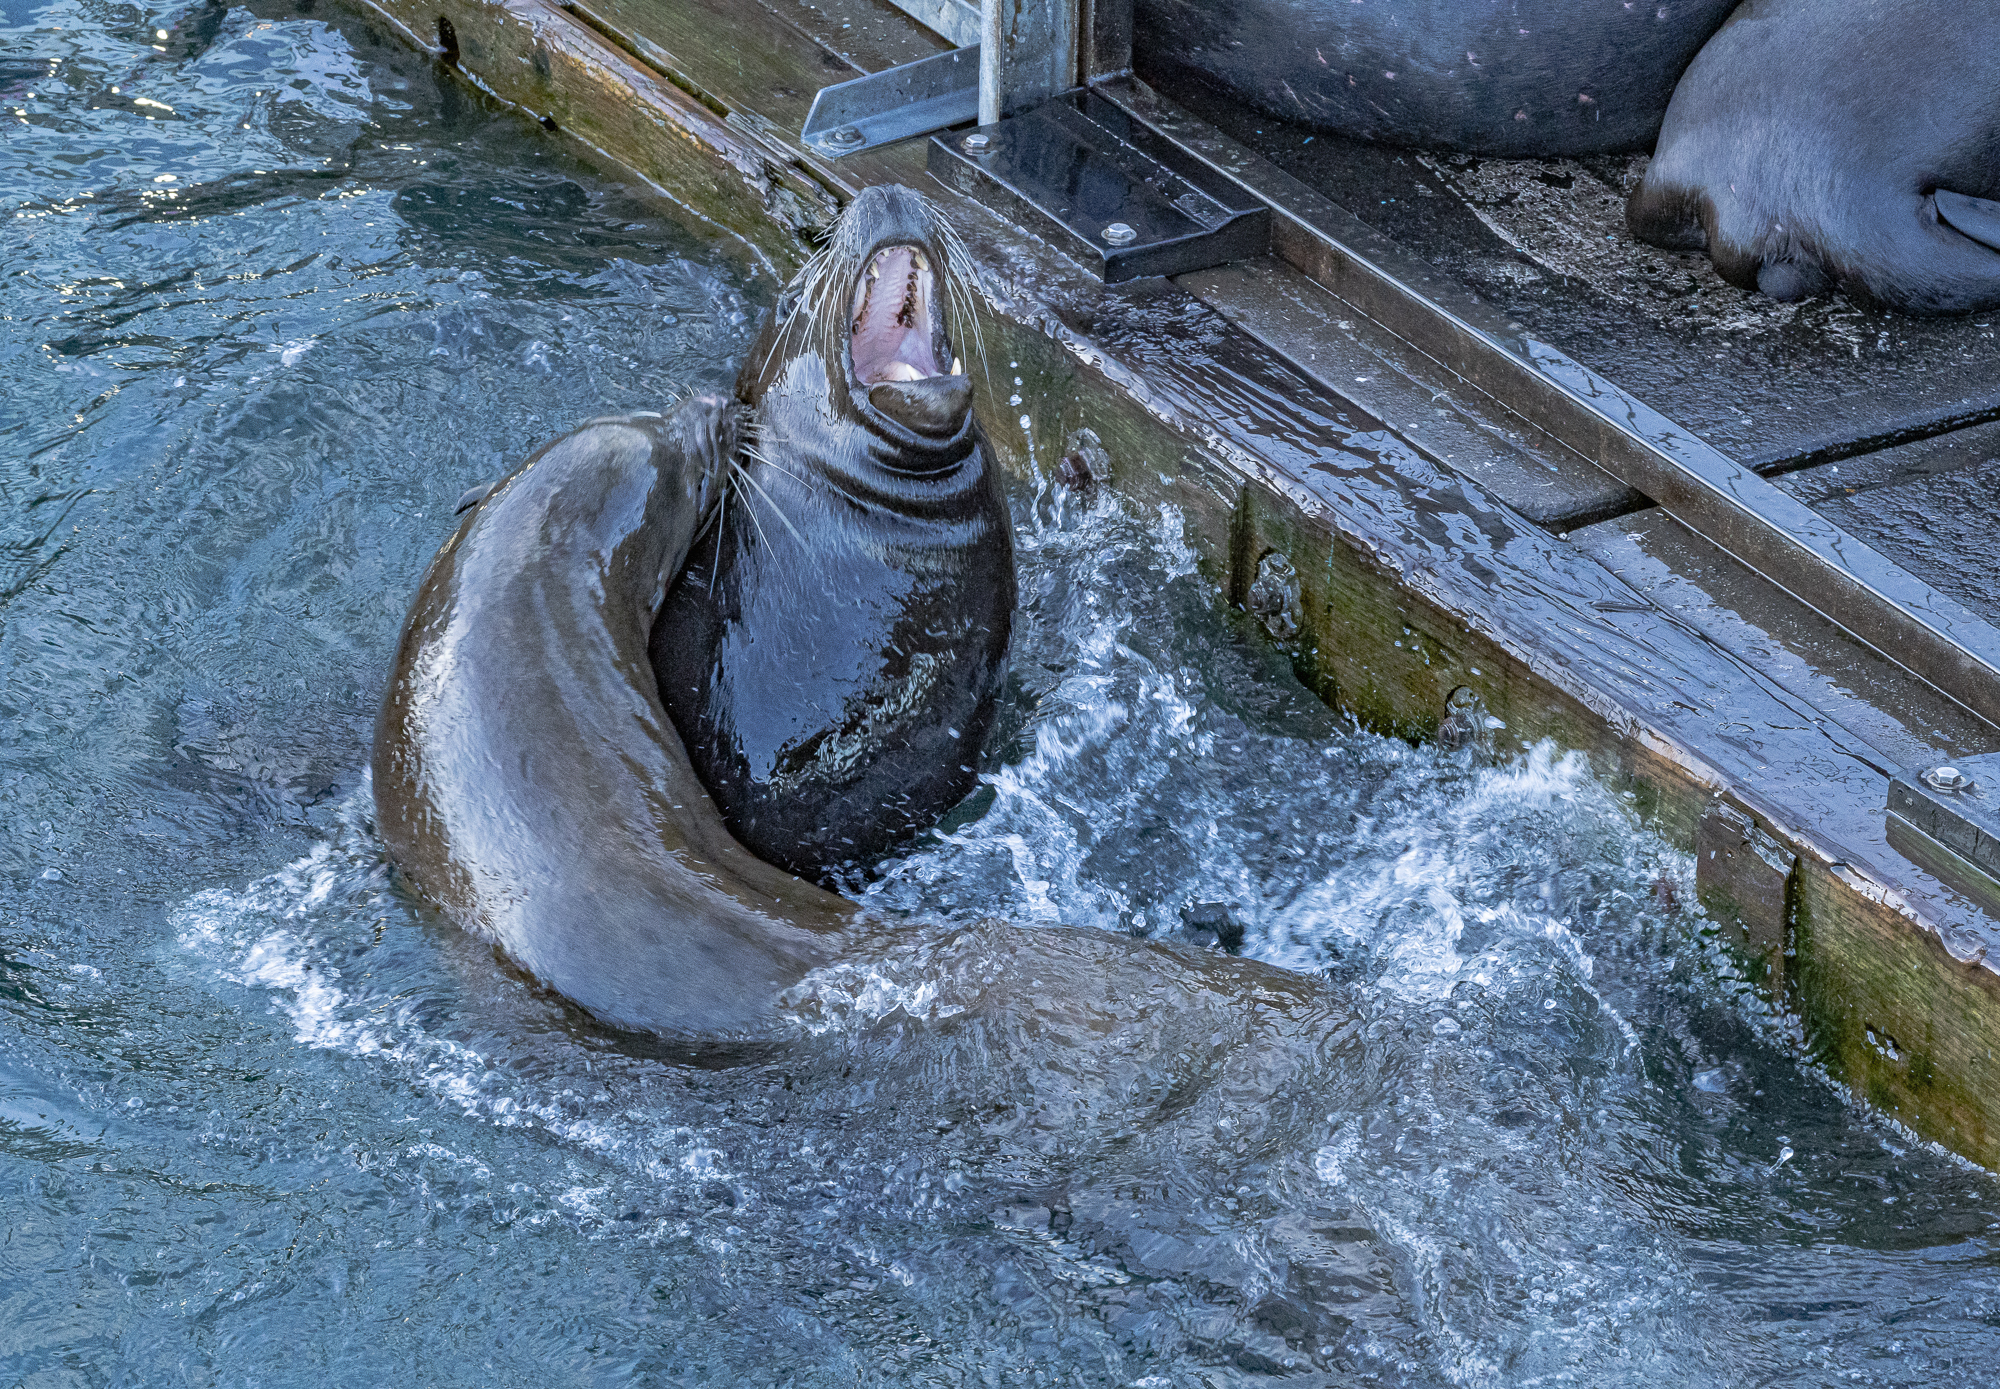 California Seals roughhouse with each other in Newport, OR